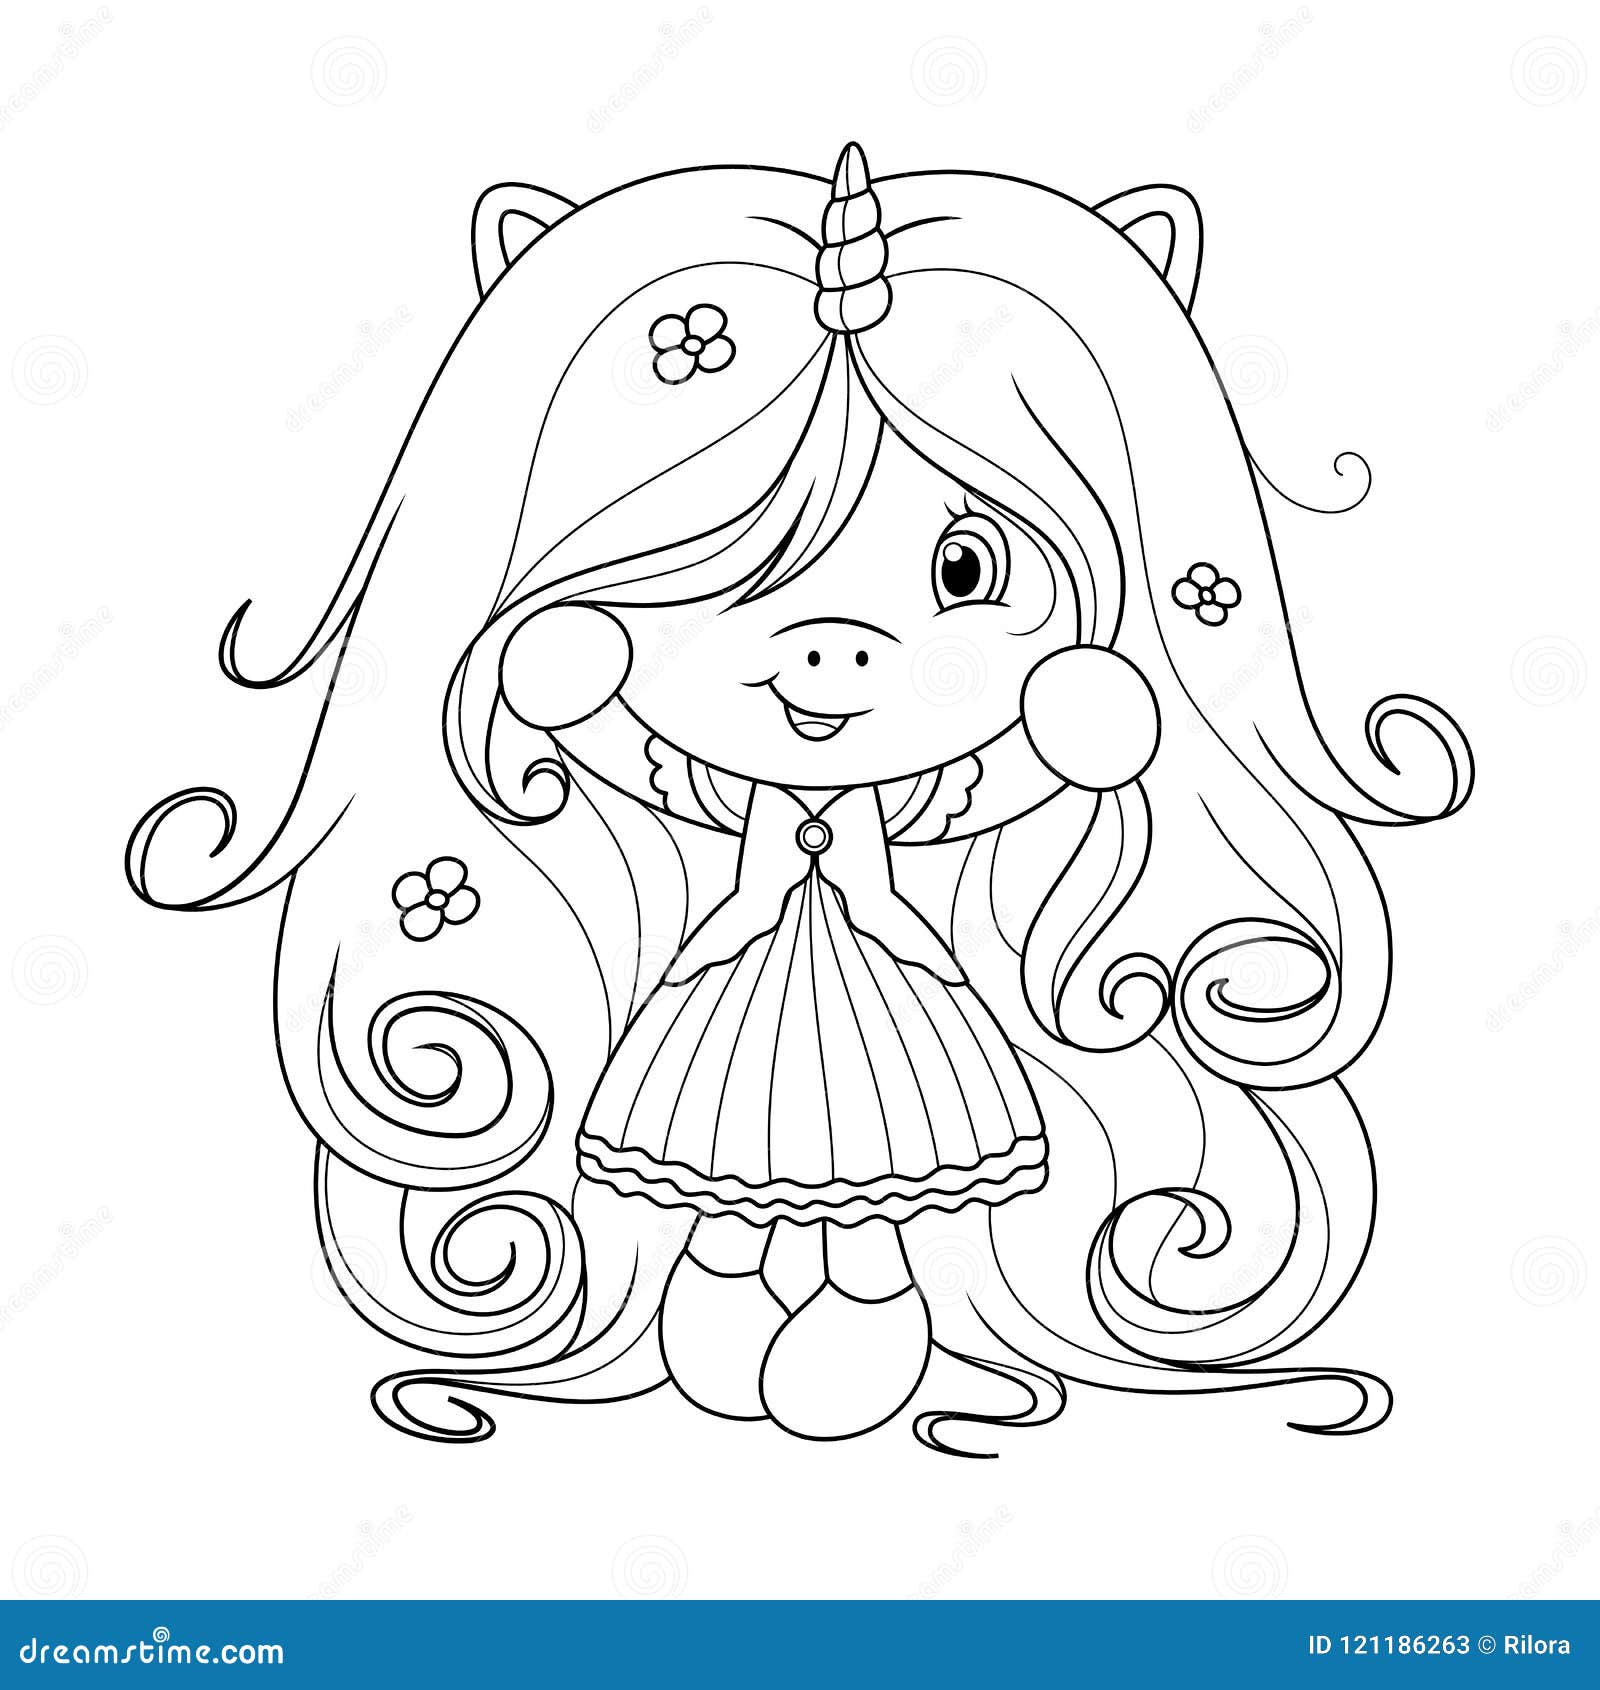 Cute Baby Unicorn With Super Long Hair With Flowers Coloring Page